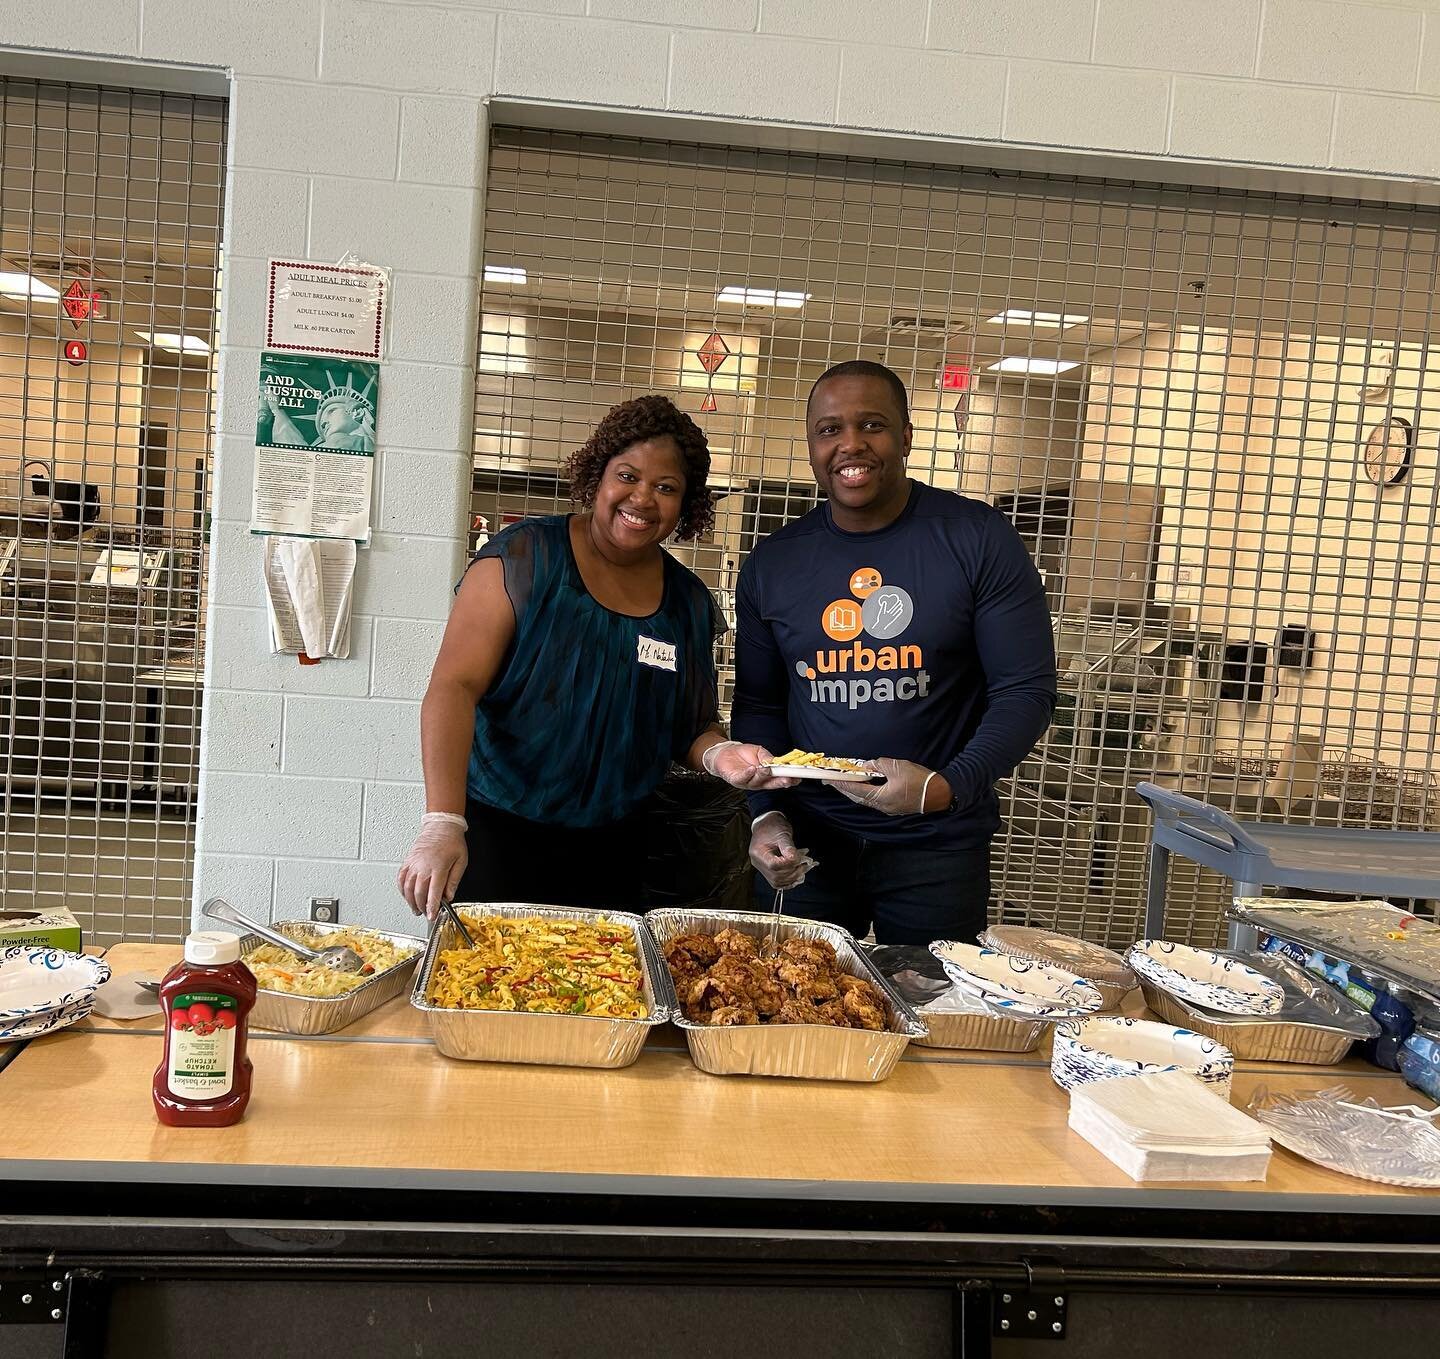 Sending a big thank you to one of our mentors, Natalie Kerr, who donated dinner last night to our Primetime program❤️ The kids loved it!!

#urbanimpactct #nonprofit #volunteer #mentor #tutor #community #fun #love